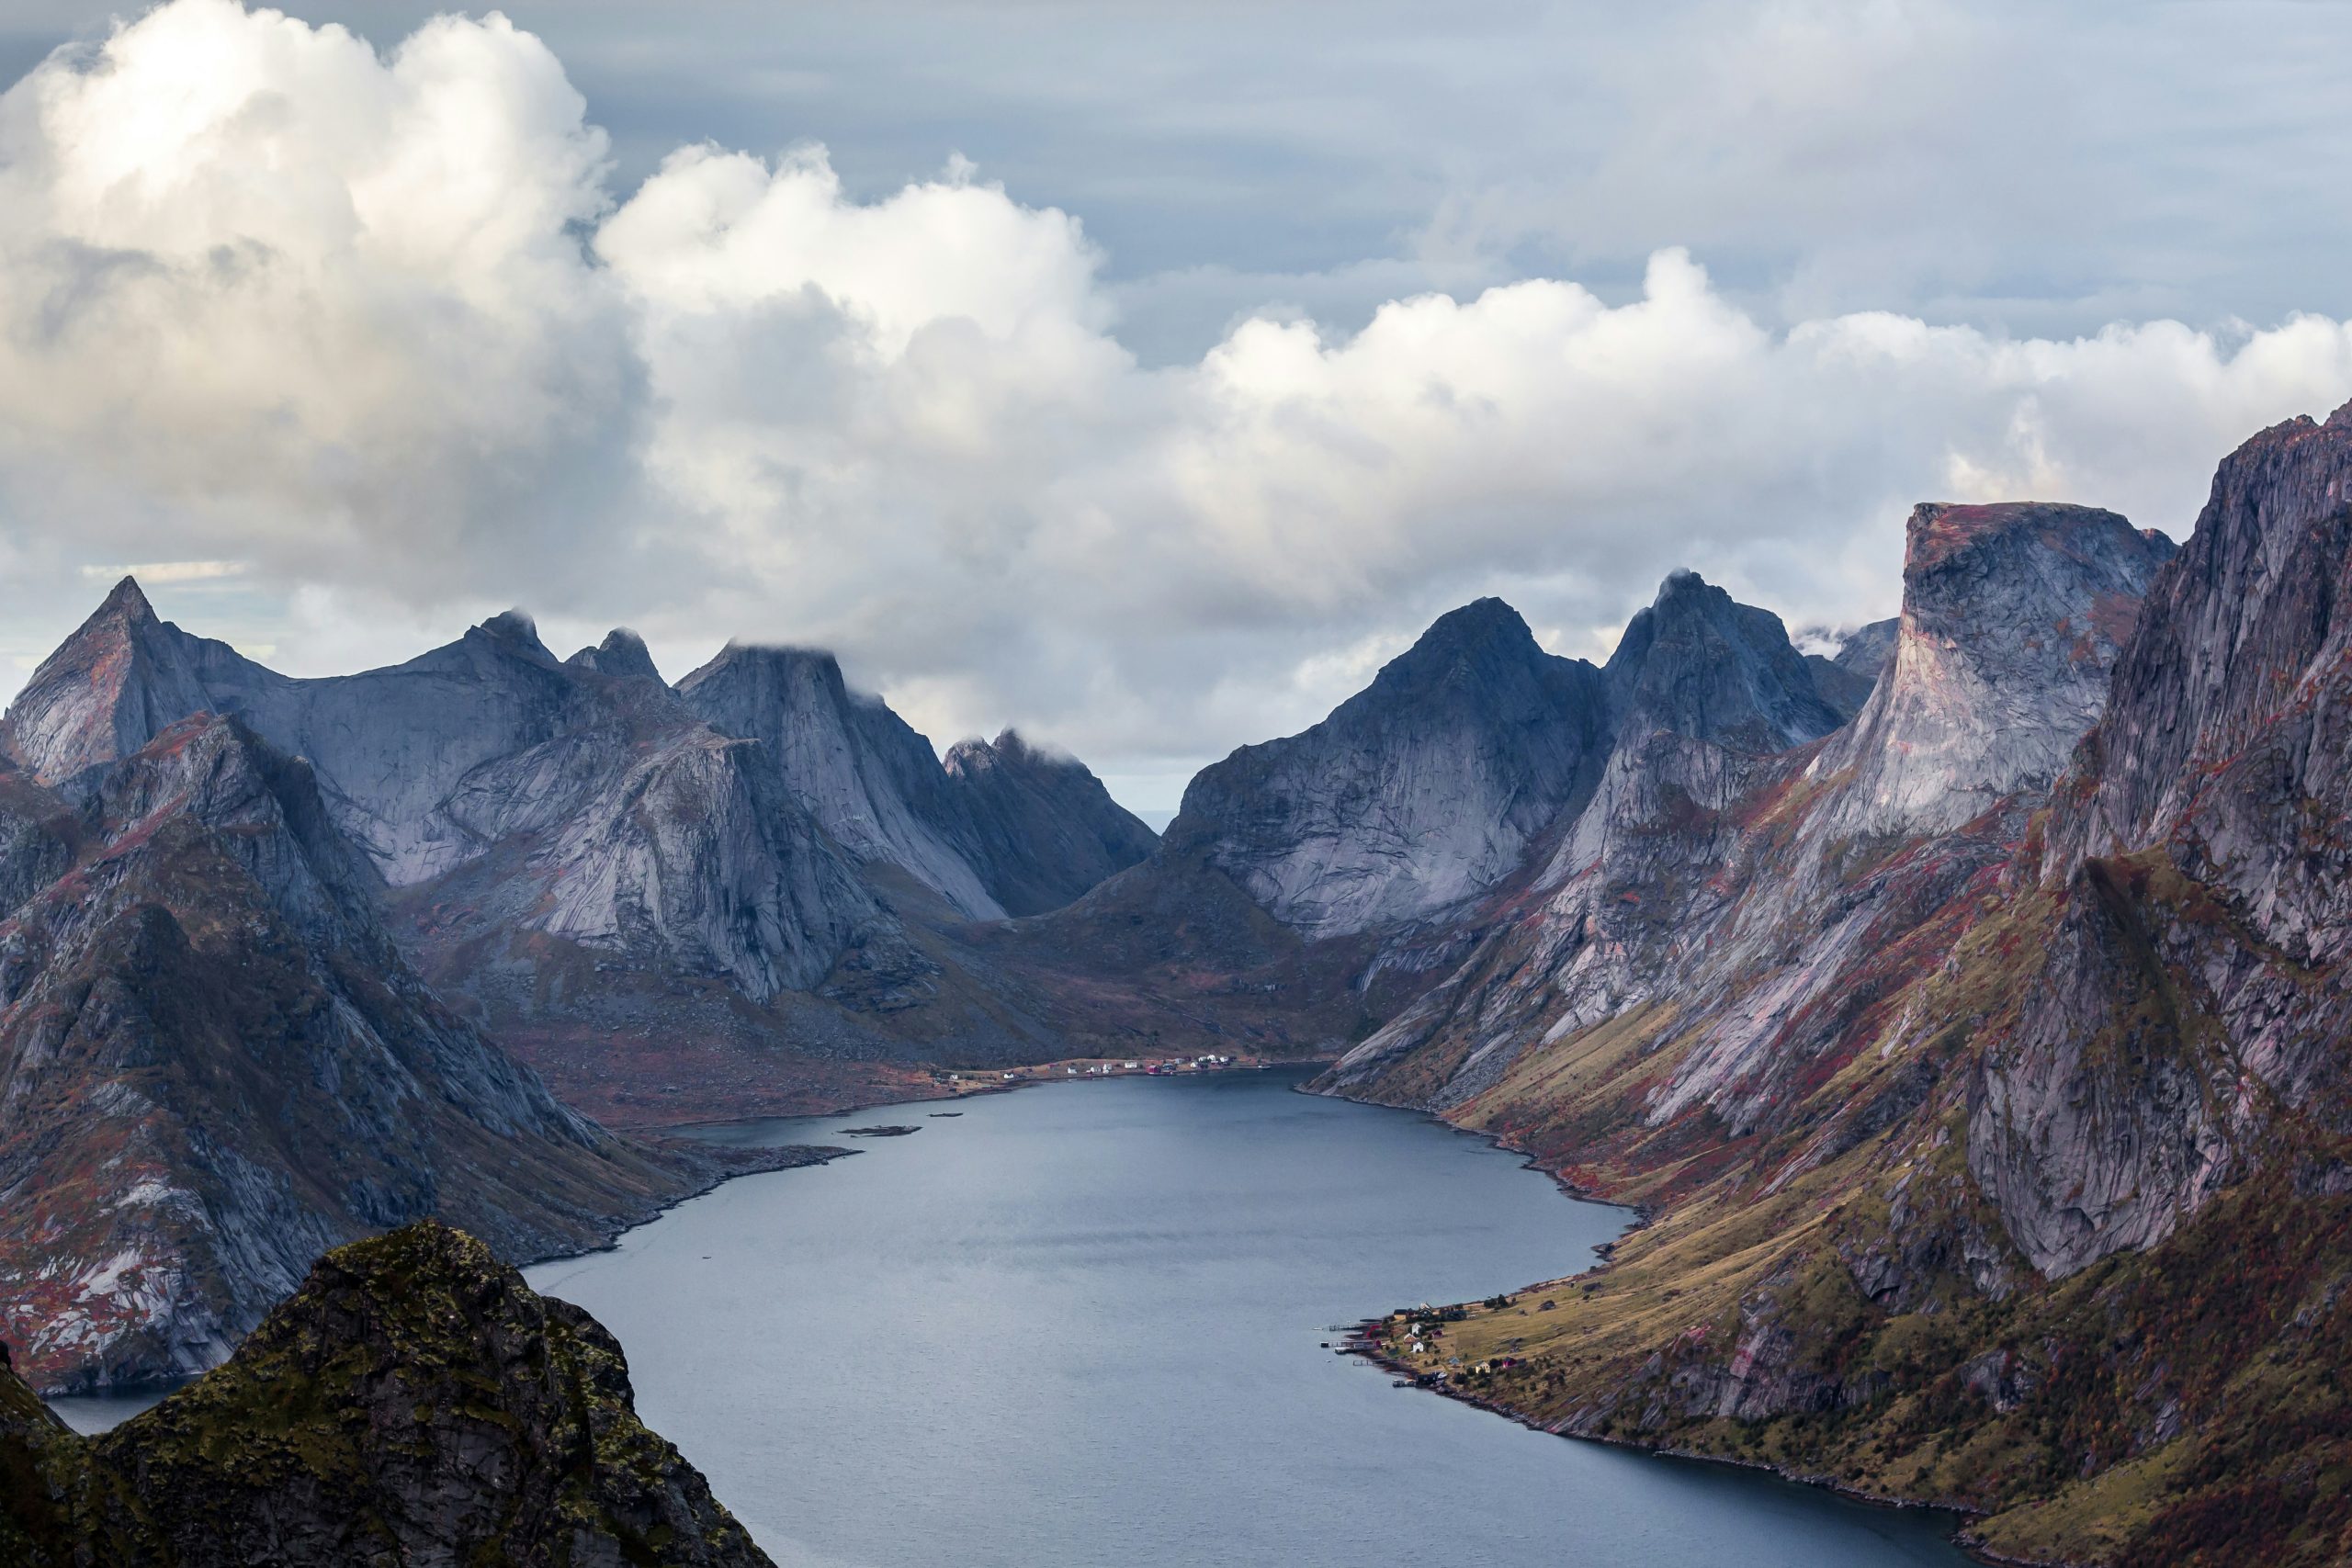 explore the breathtaking beauty of norway's fjords and experience nature at its best. plan your journey and discover the stunning landscapes and serene waters of the fjords.